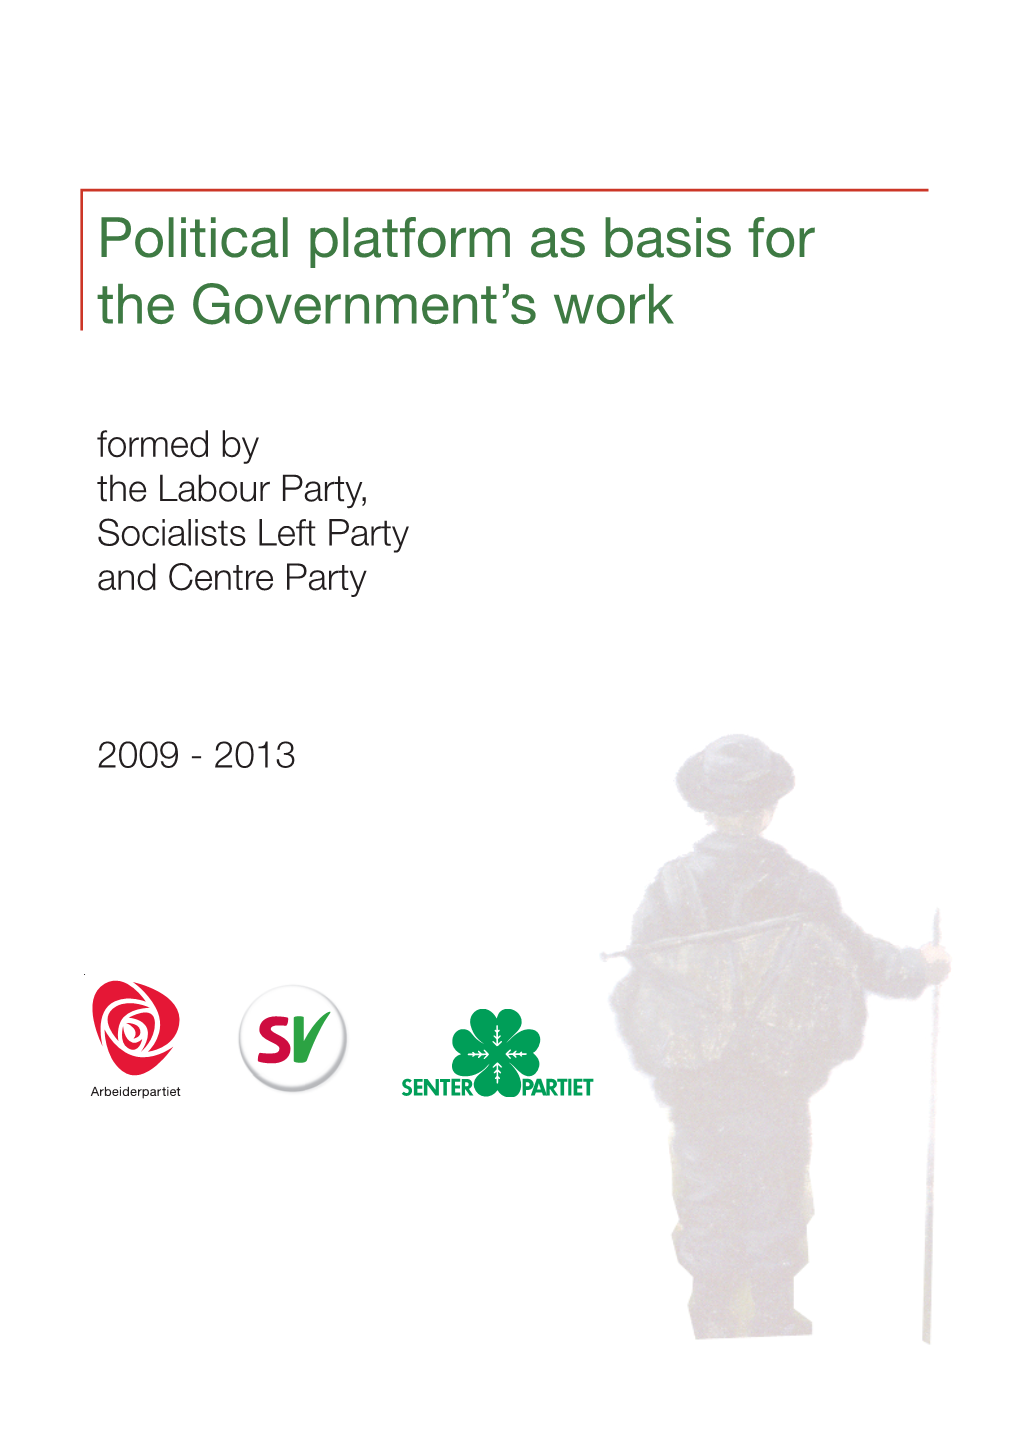 Political Platform As Basis for the Government's Work